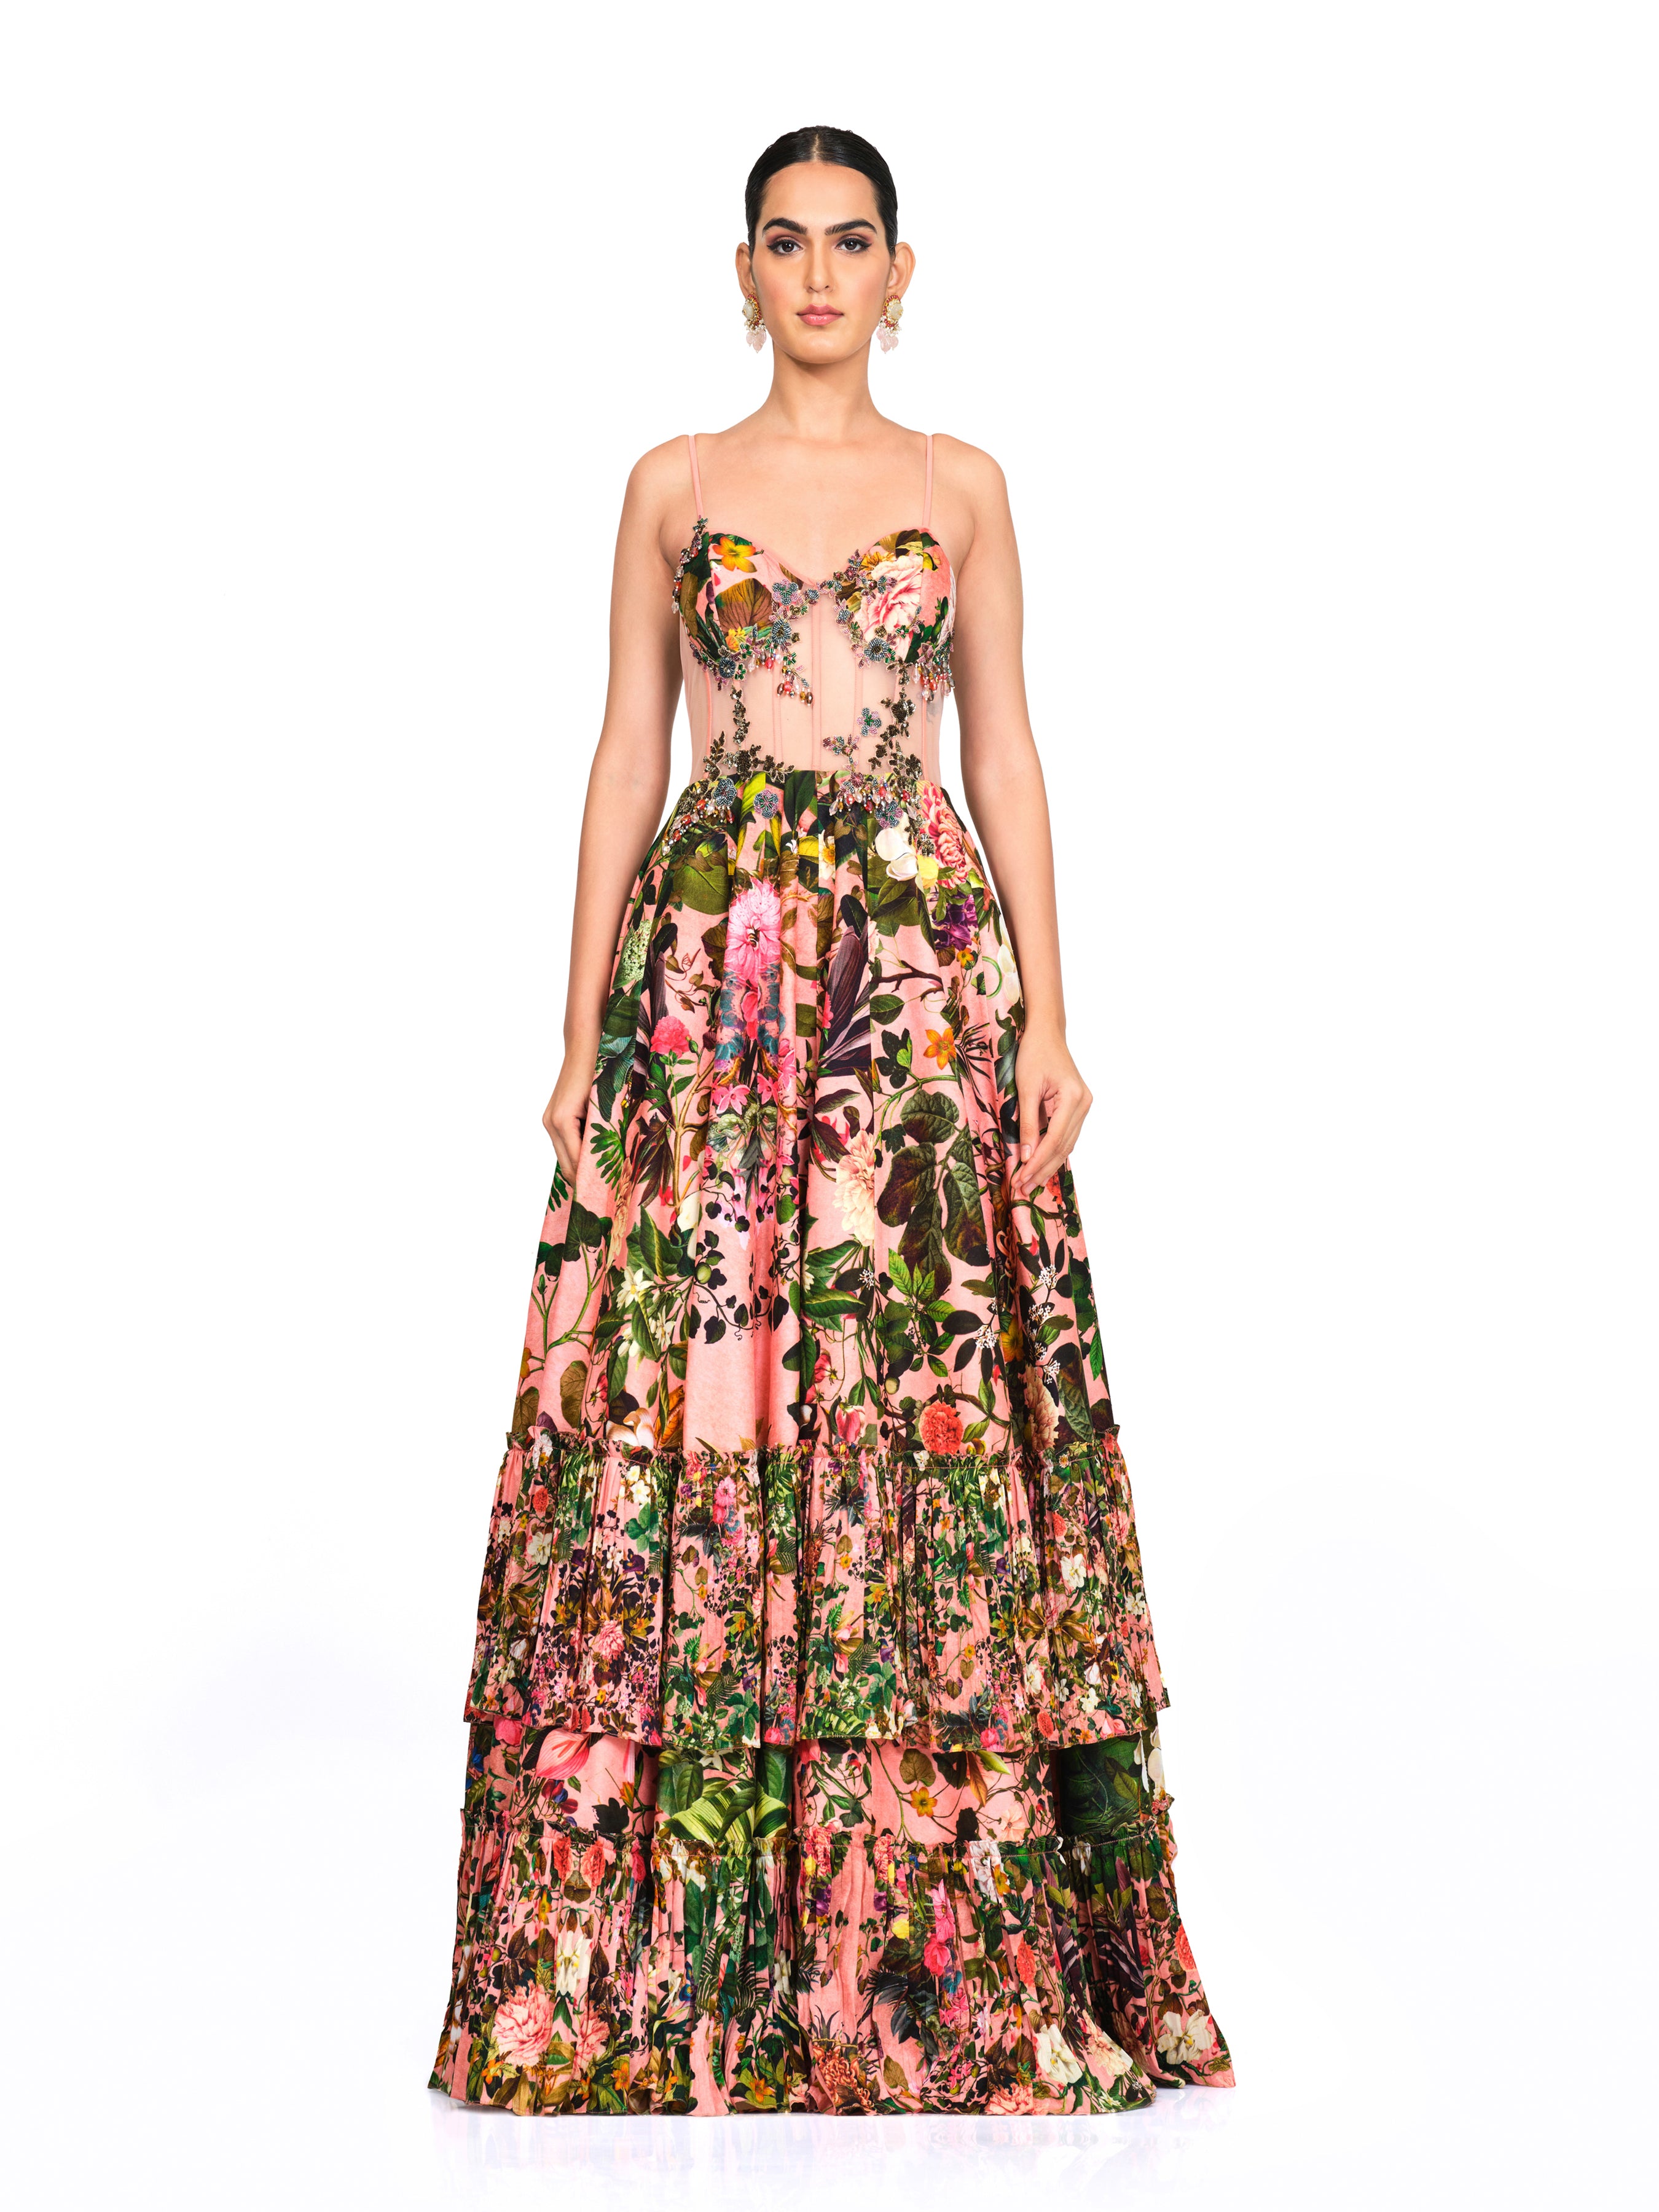 Printed Corset Gown With Appliqué Work